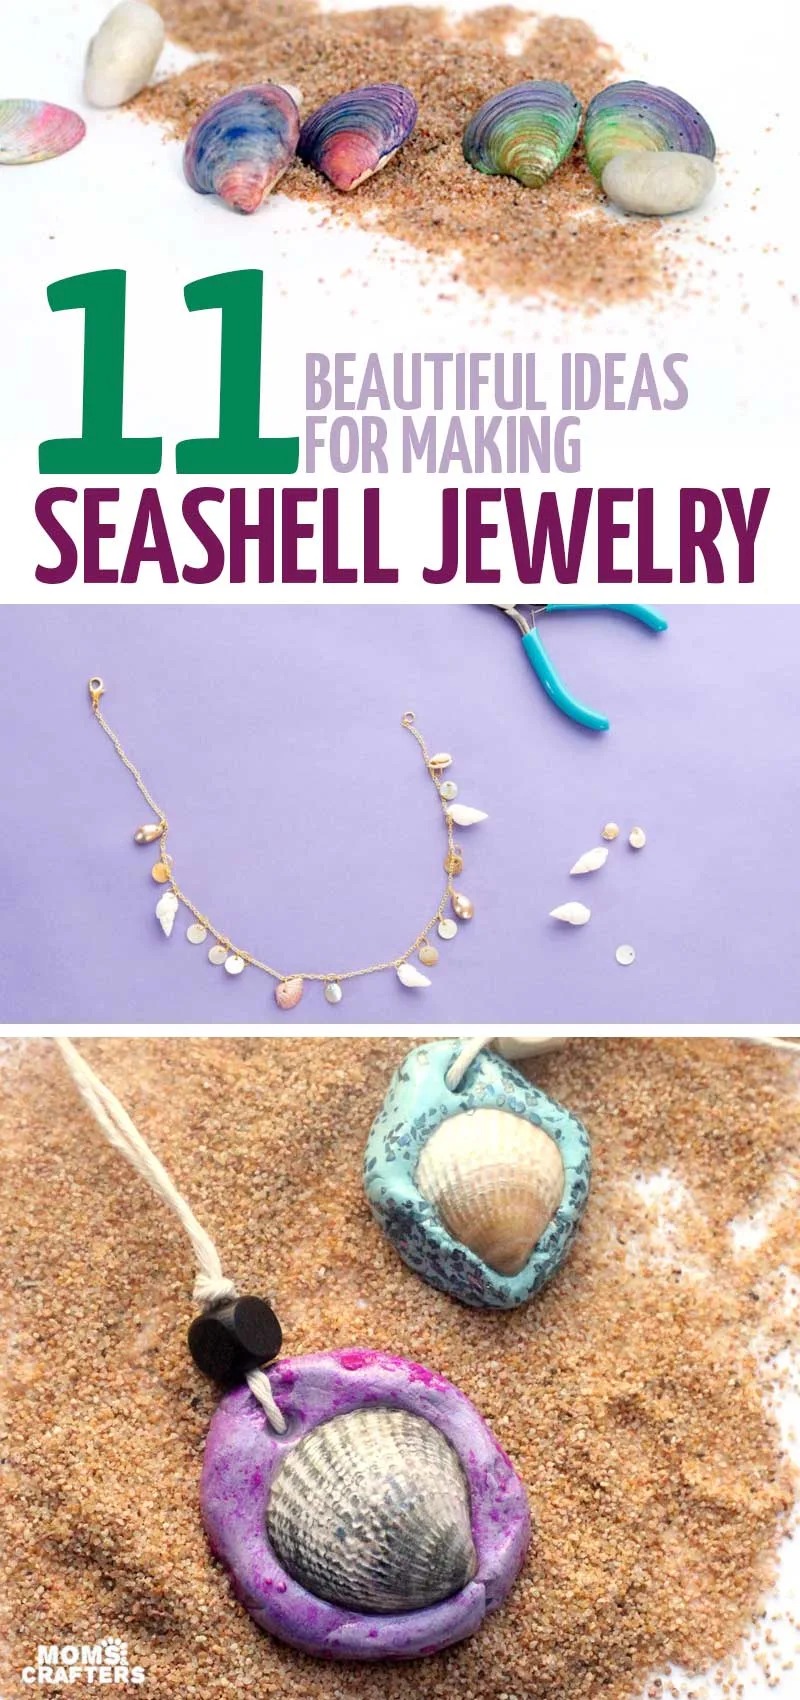 Click for the motherload of seashell jewelry DIY ideas! In this post you'll find DIY necklaces, earrings, and bracelets, all seashell crafts! These crafts are fun for summer and for teens. 